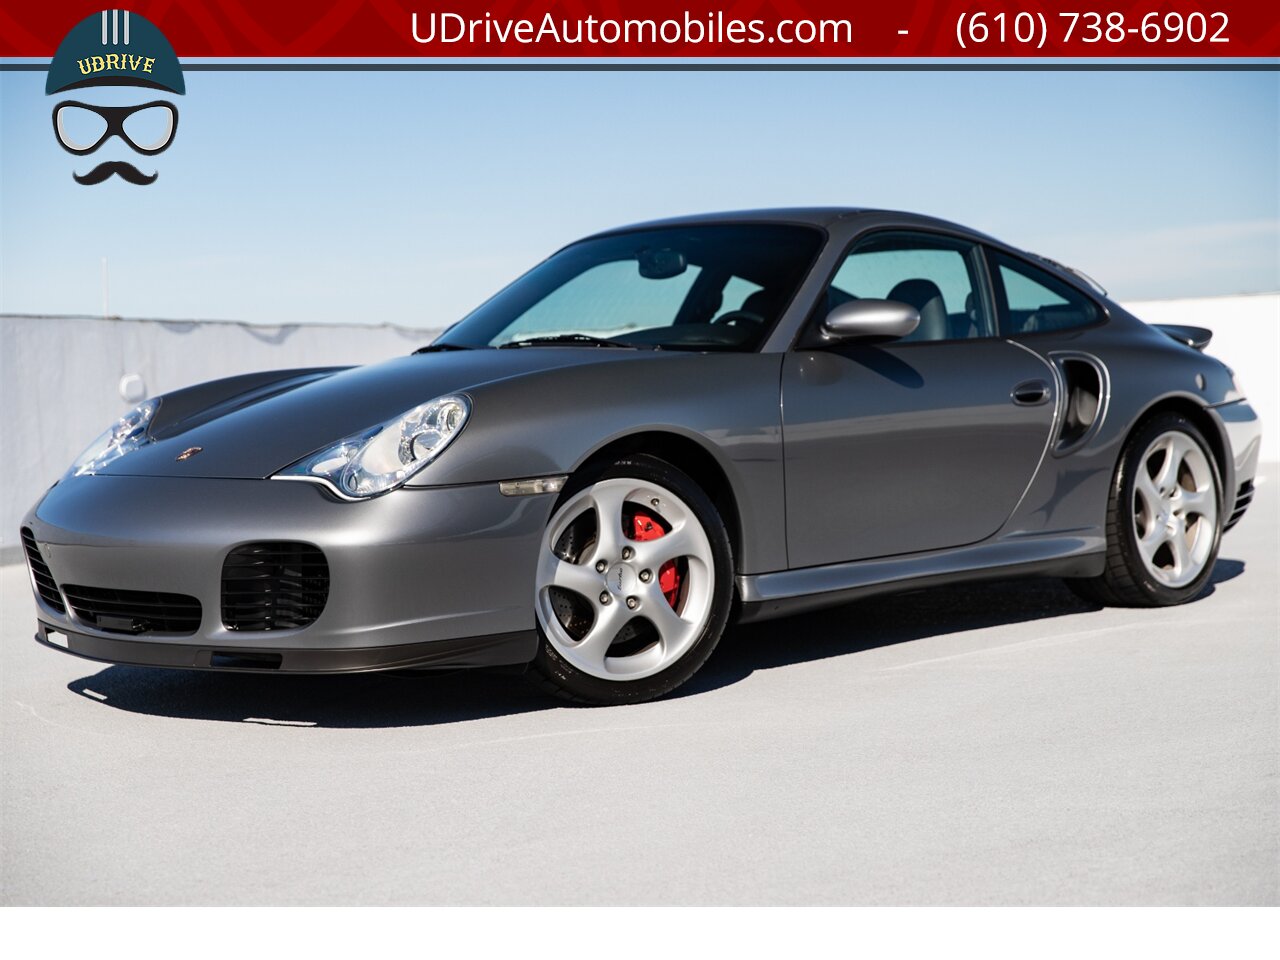 2003 Porsche 911 996 Turbo X50 Power Kit 6 Speed Seal Grey  over Black Leather - Photo 1 - West Chester, PA 19382